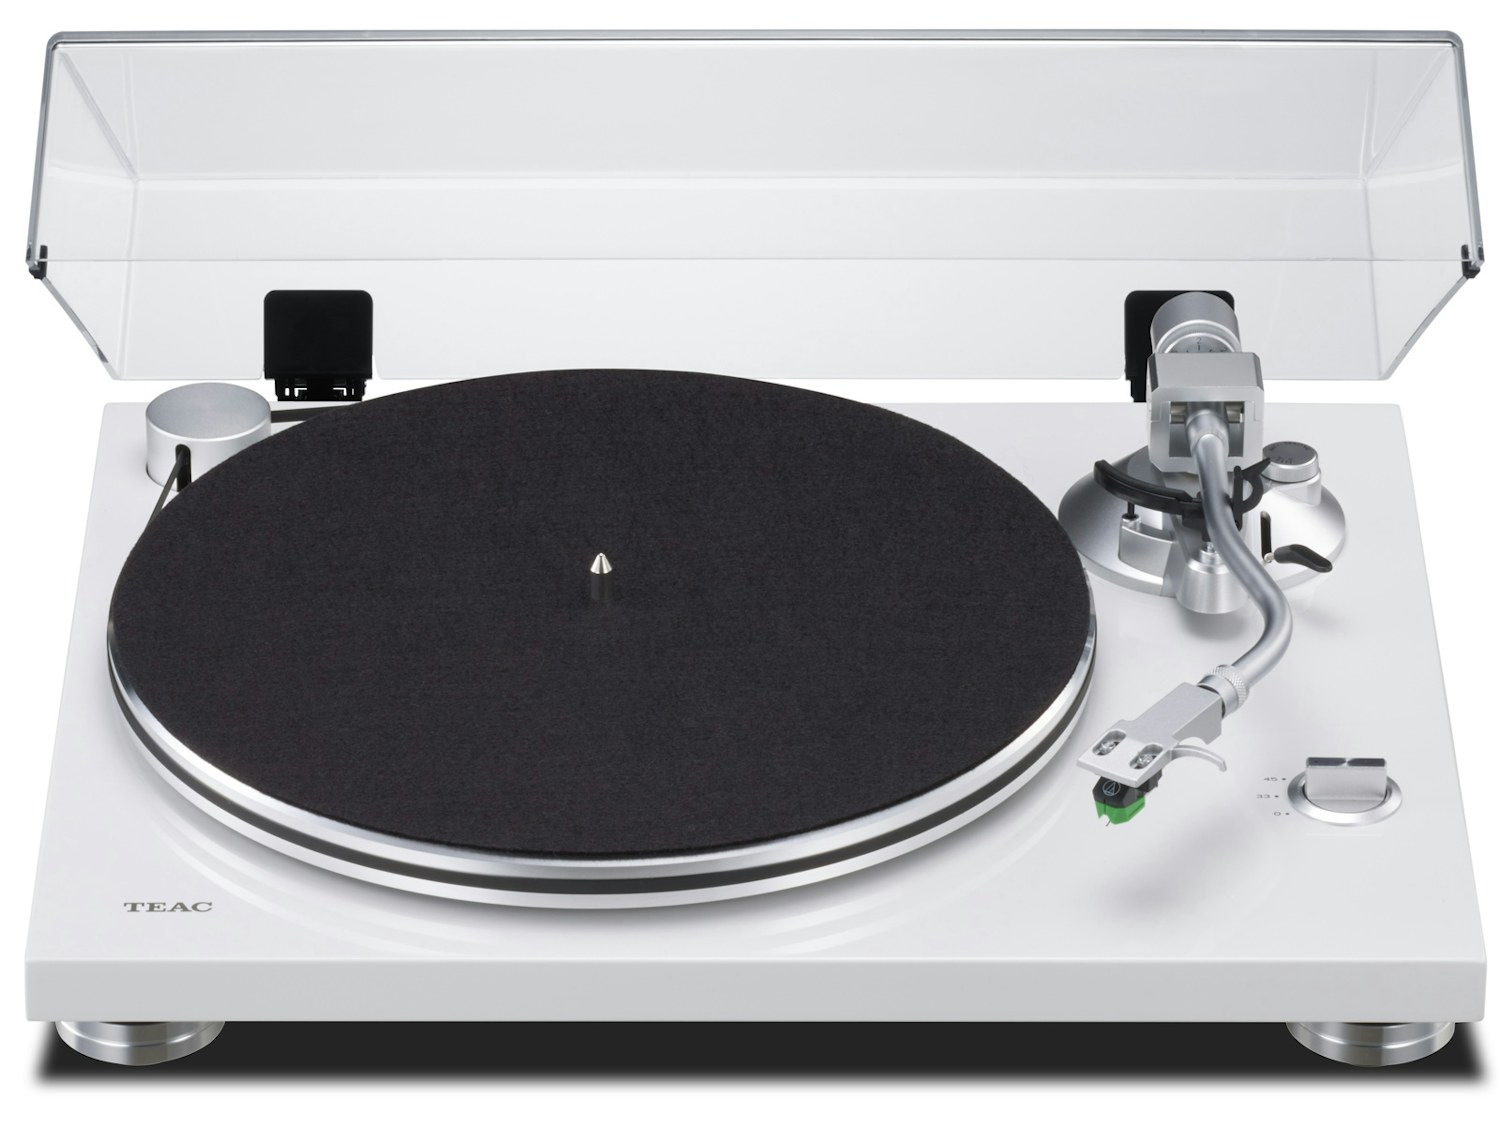 Tn 3b turntable white front view